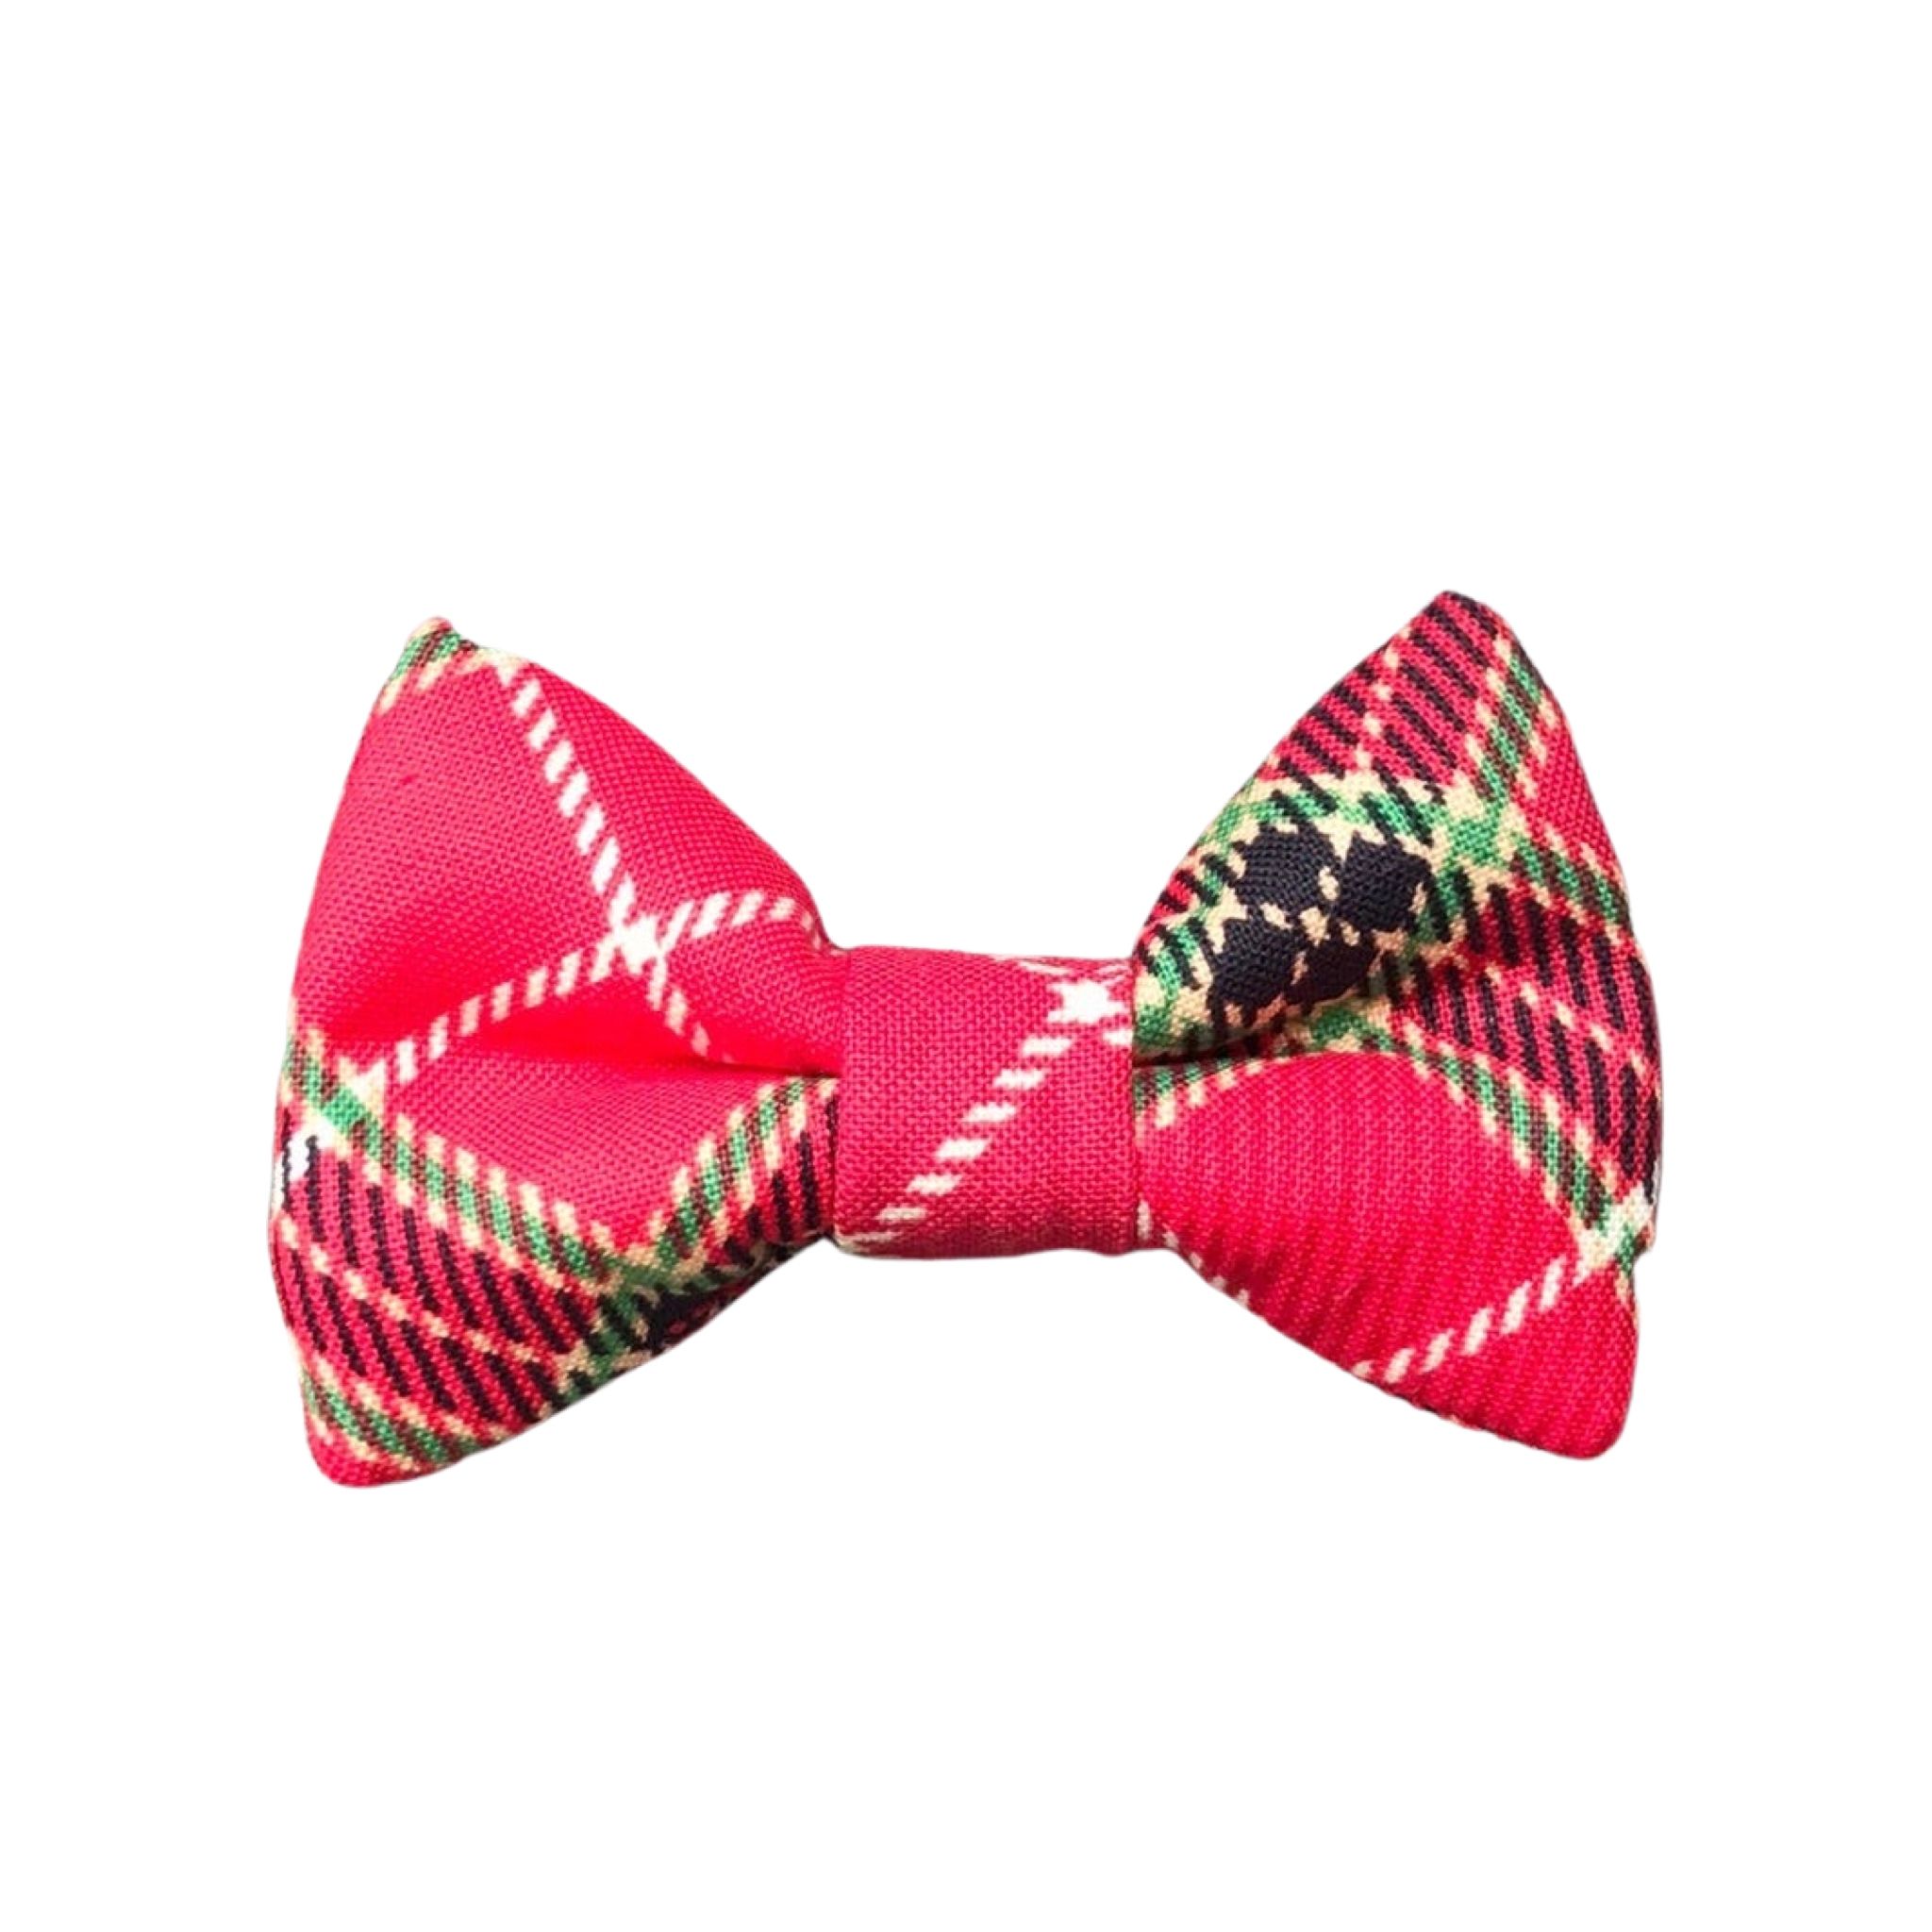 Dog Bow Tie - Red Plaid